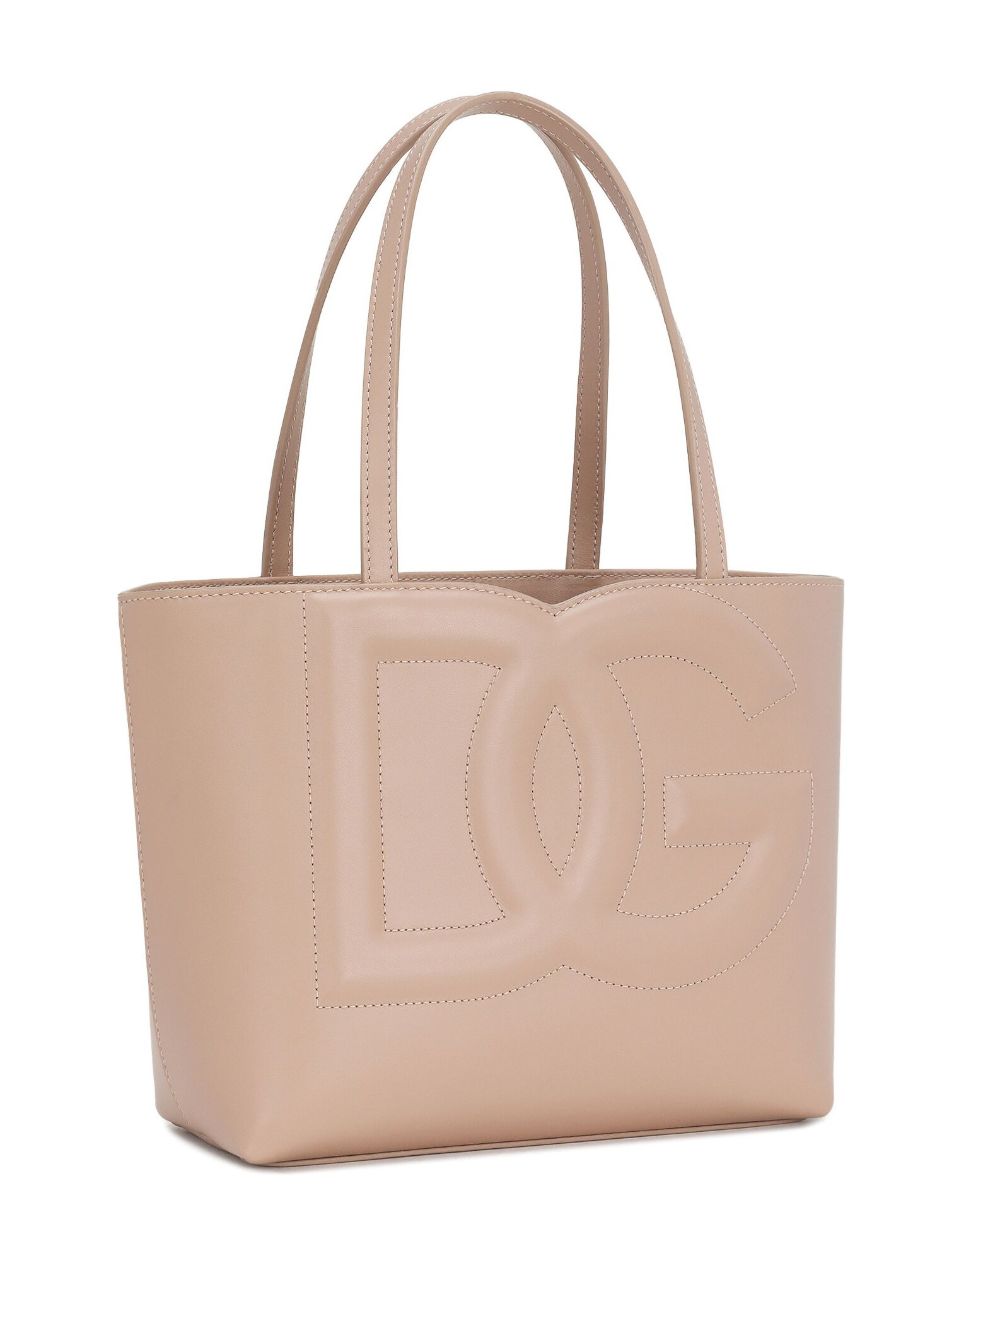 DOLCE & GABBANA Blush Pink Quilted Leather Tote Handbag for Women